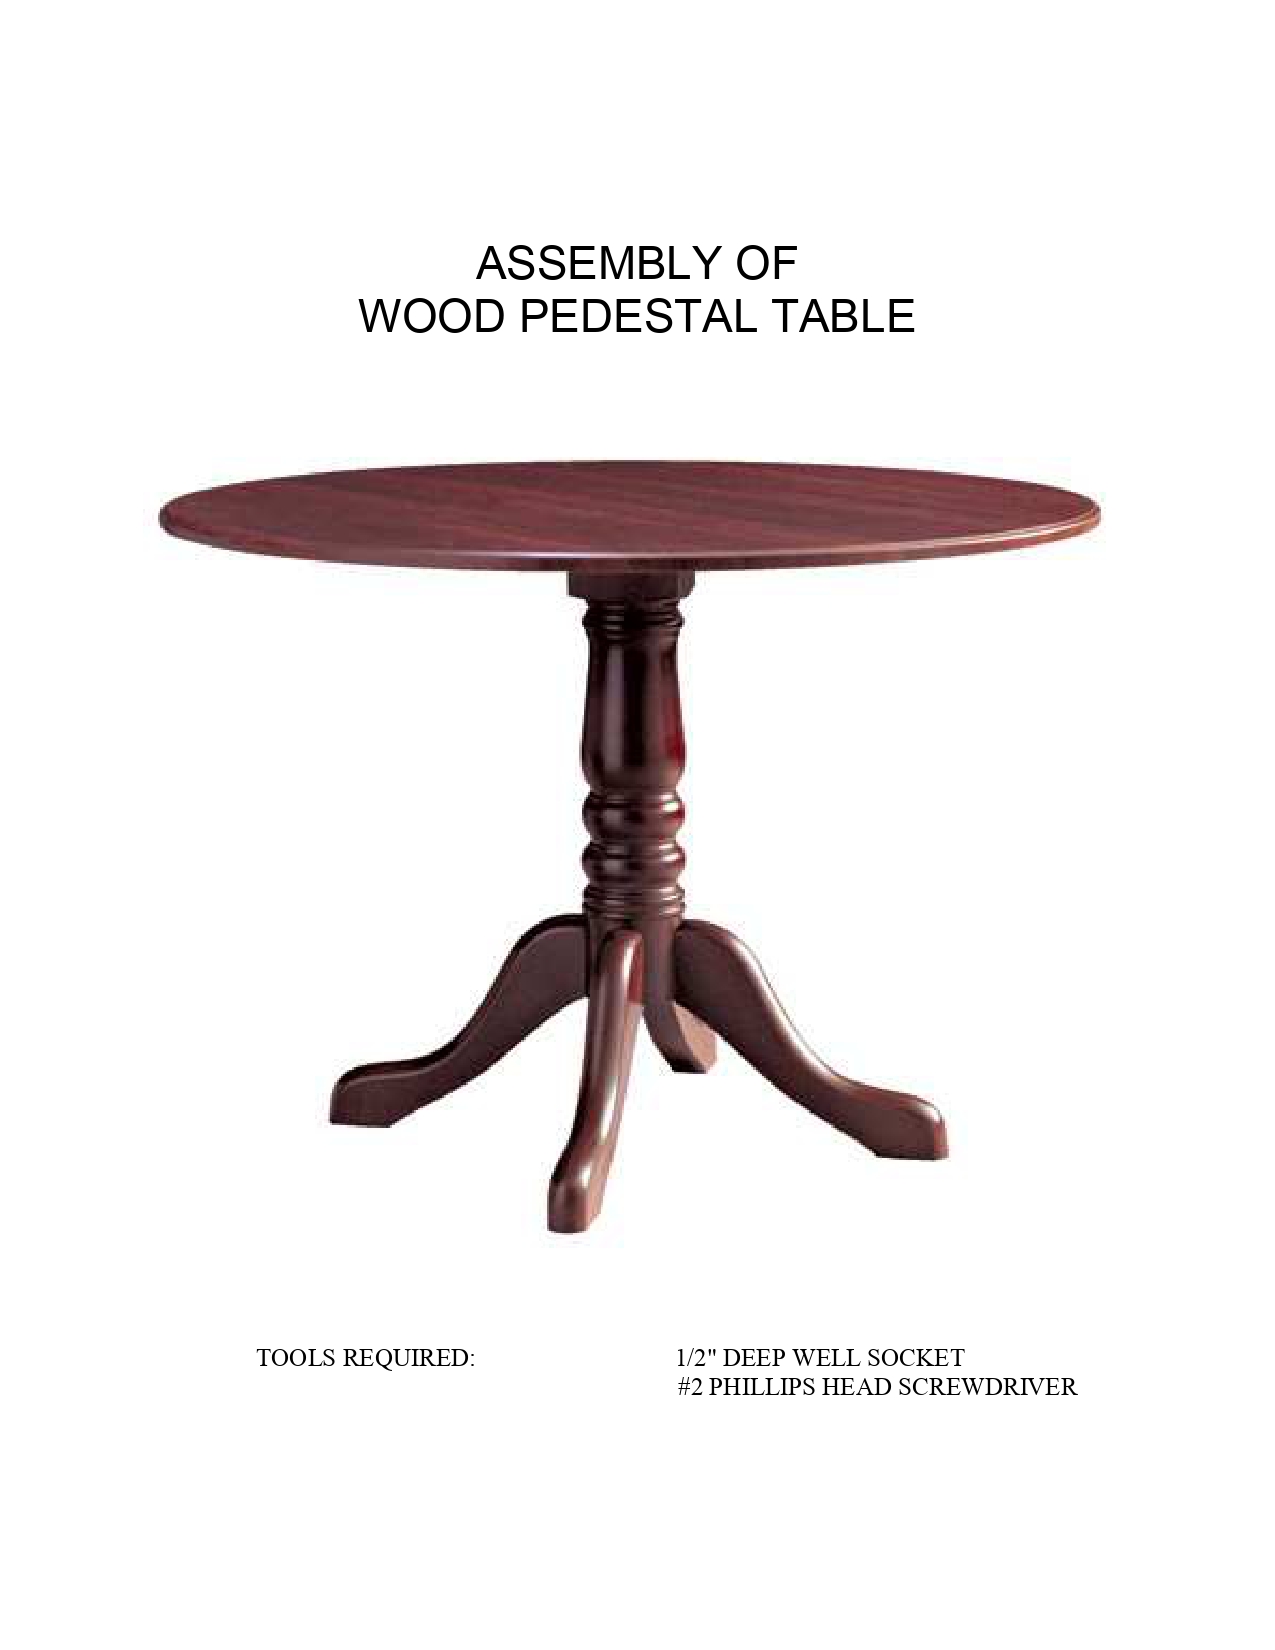 WOOD PEDESTAL TABLE ASSEMBLY INSTRUCTIONS